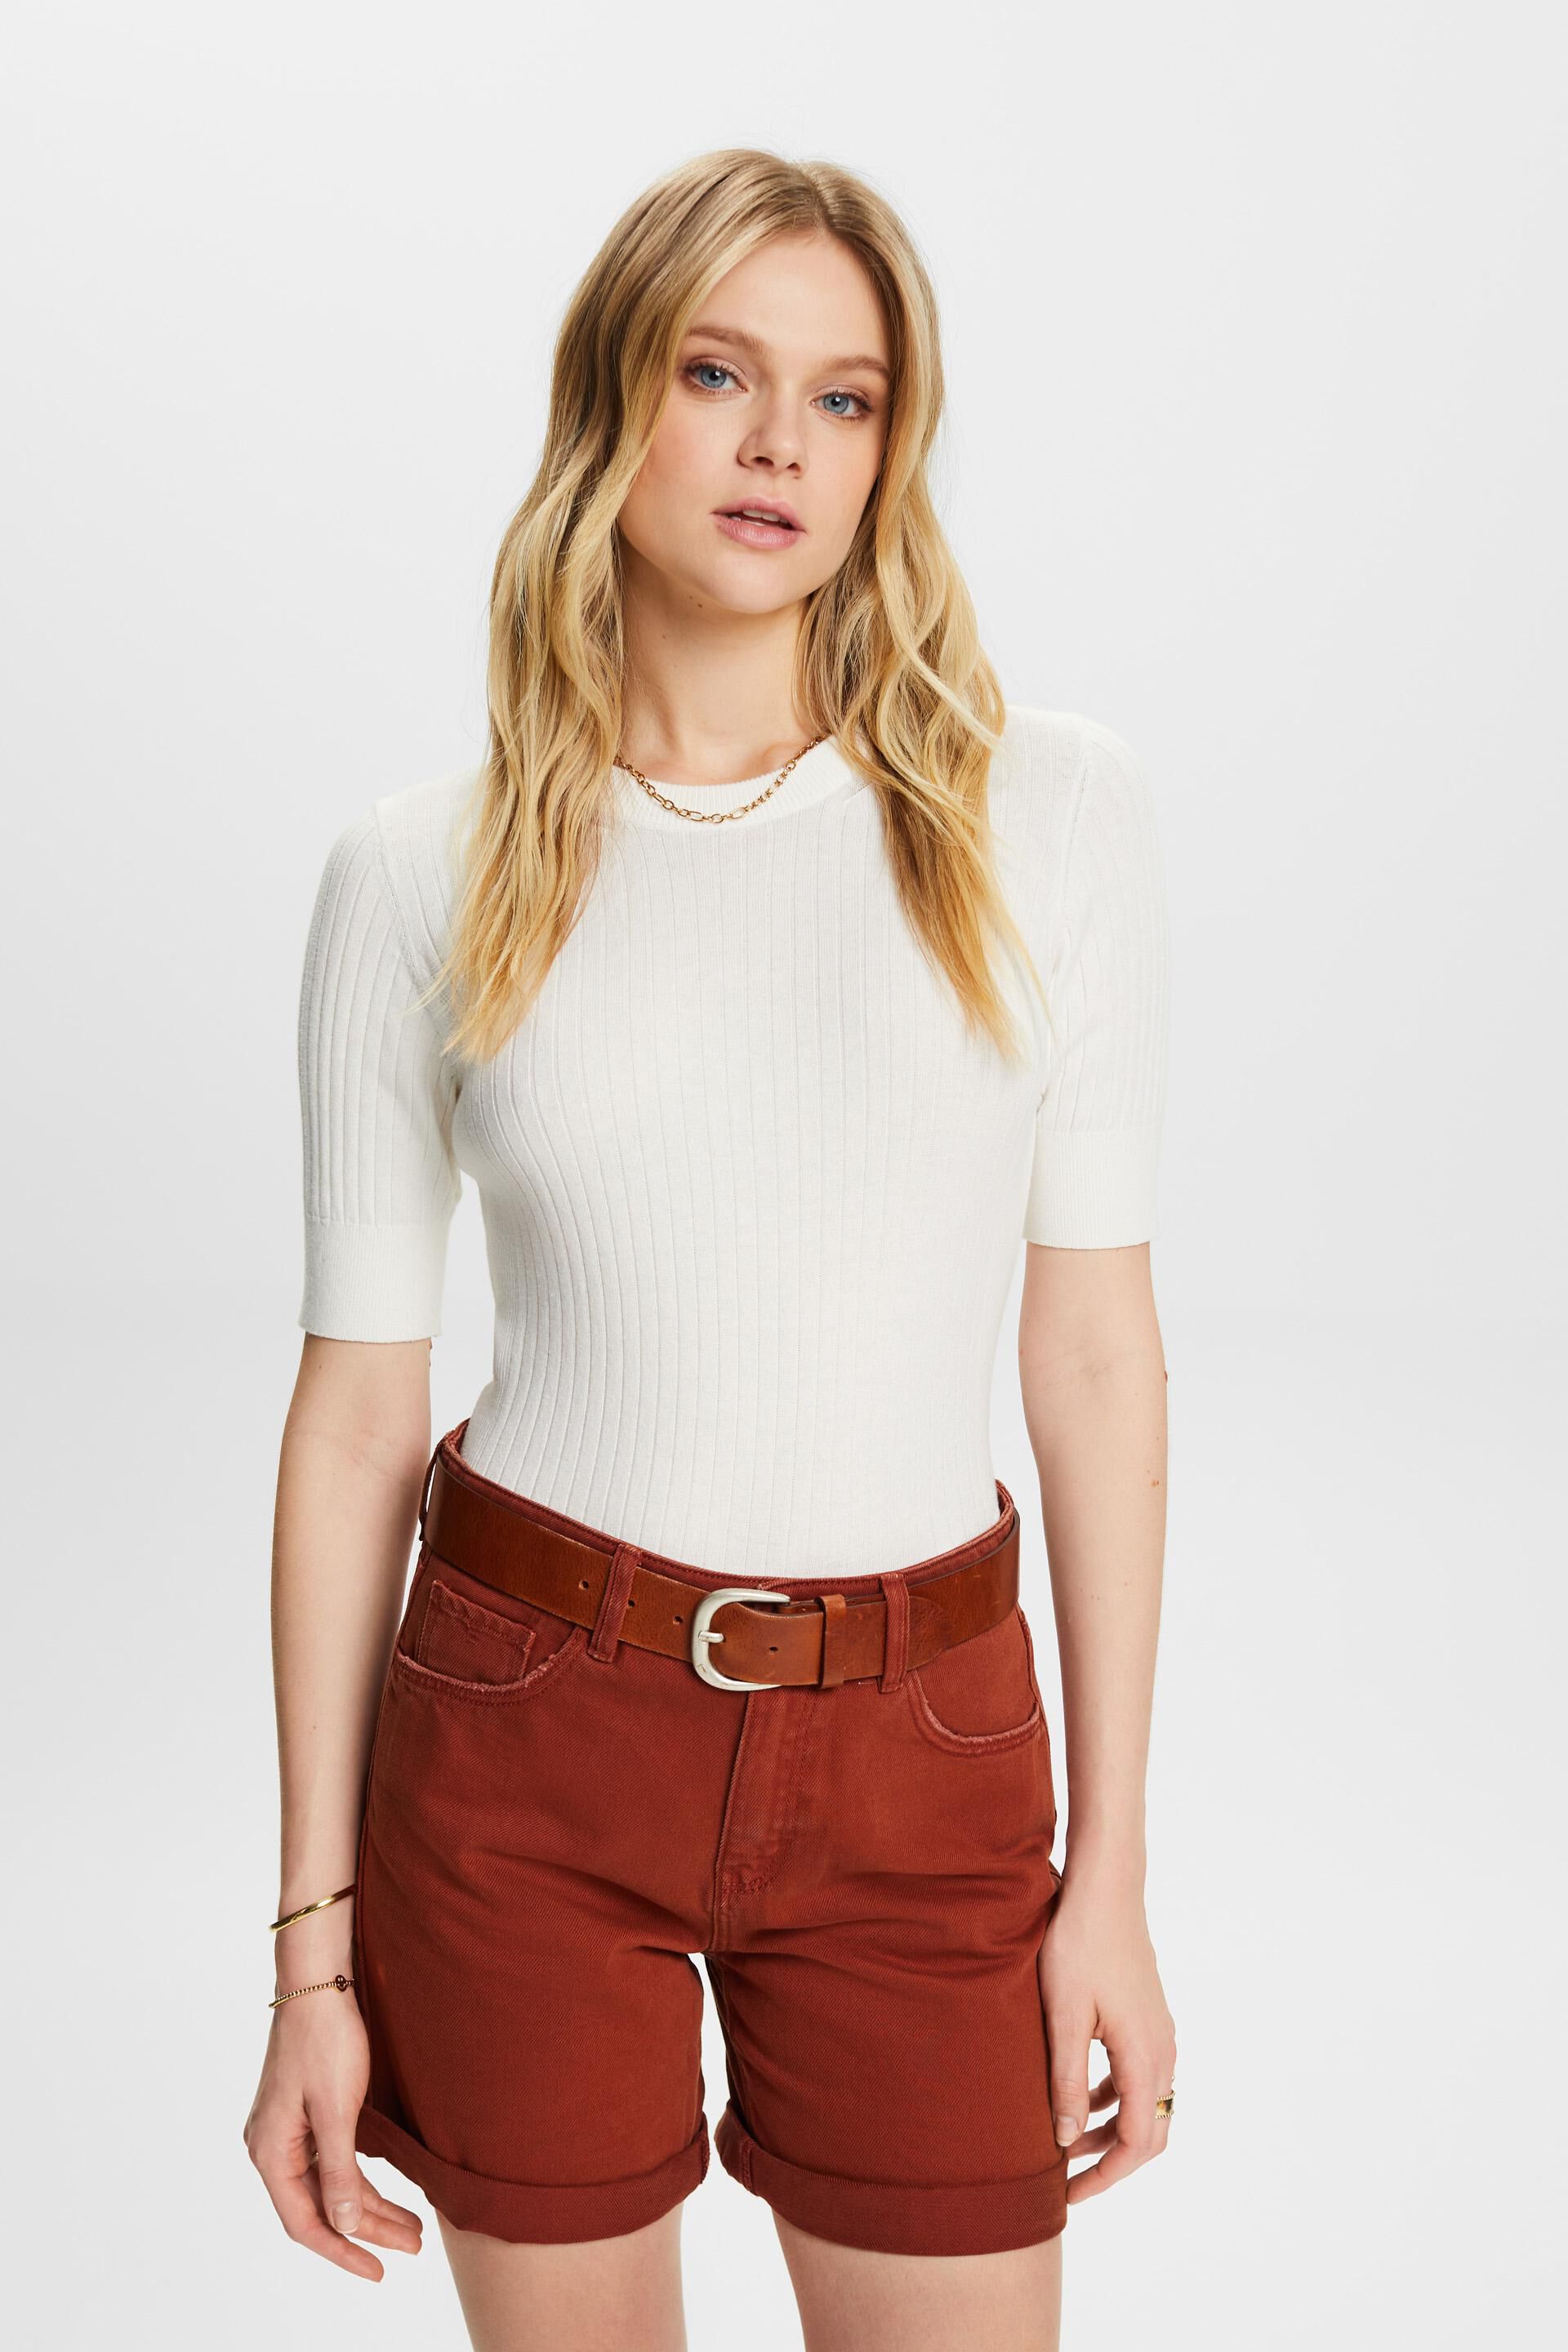 Esprit Short-sleeved ribbed sweater